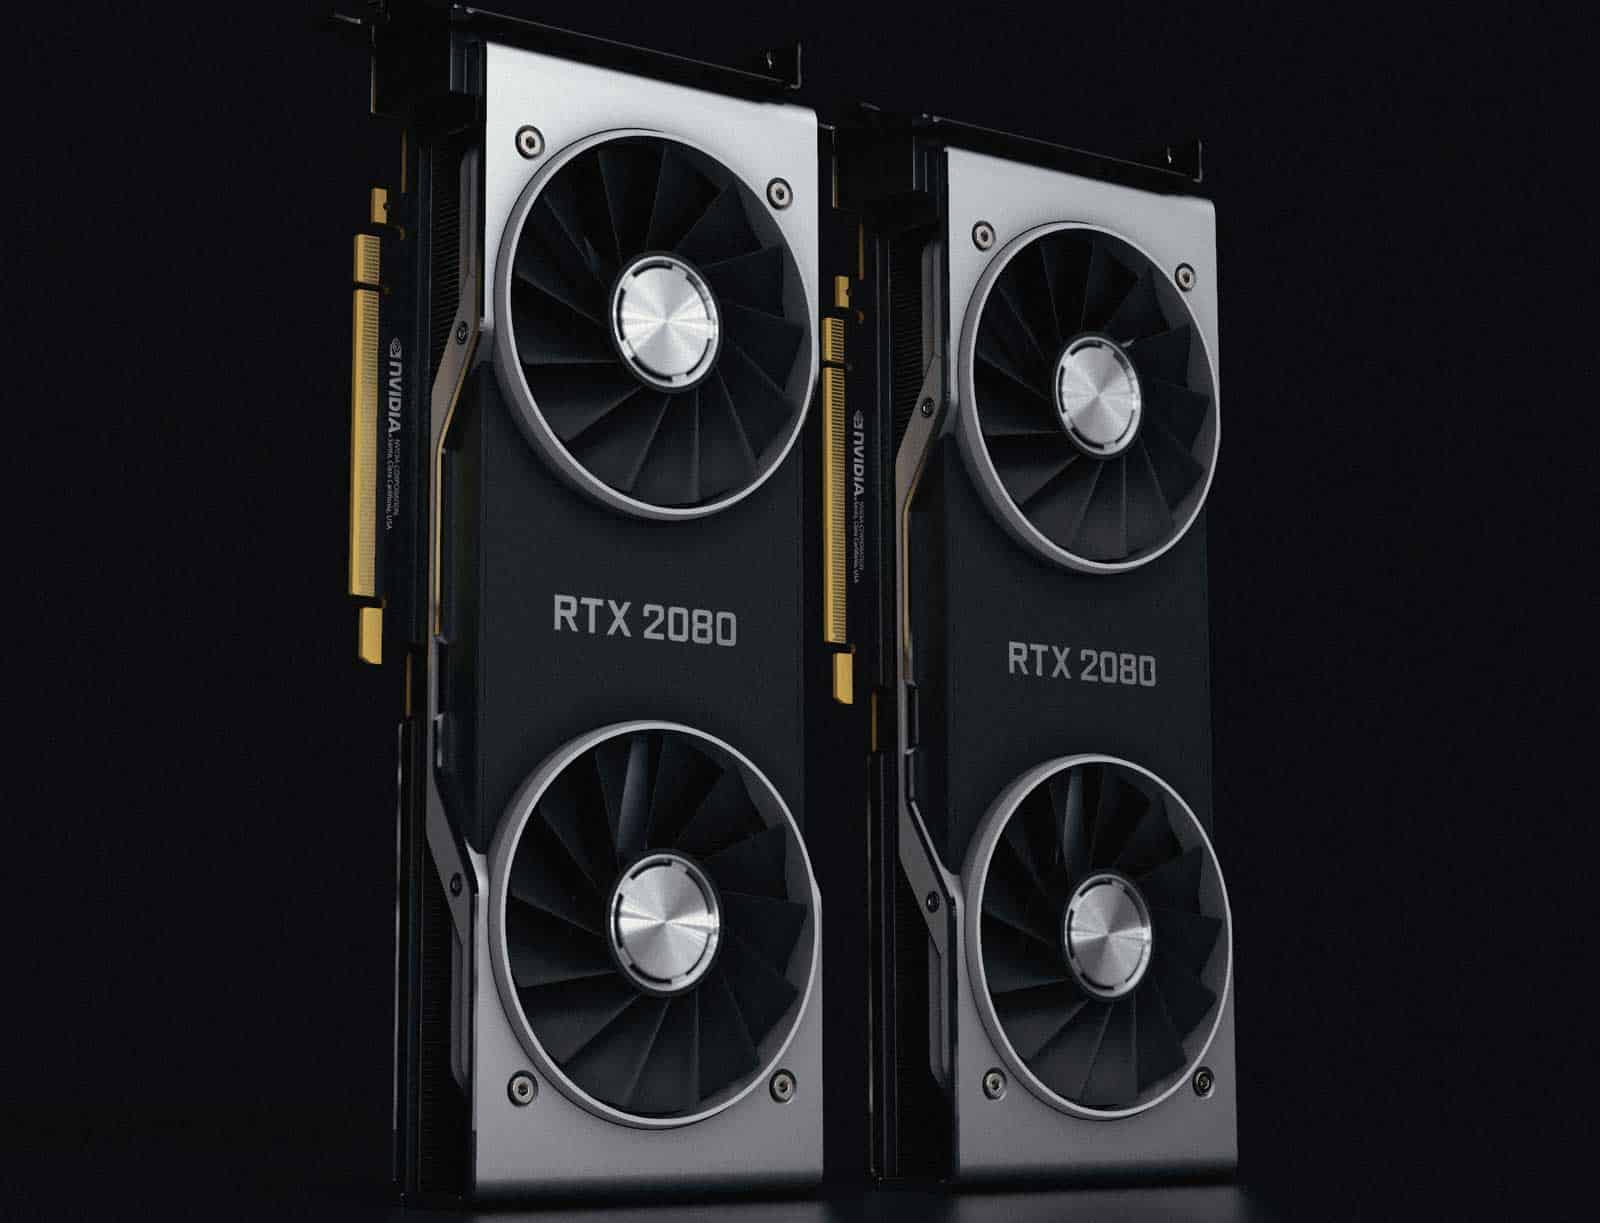 Will Graphics Cards Prices Revert Back To Normal?